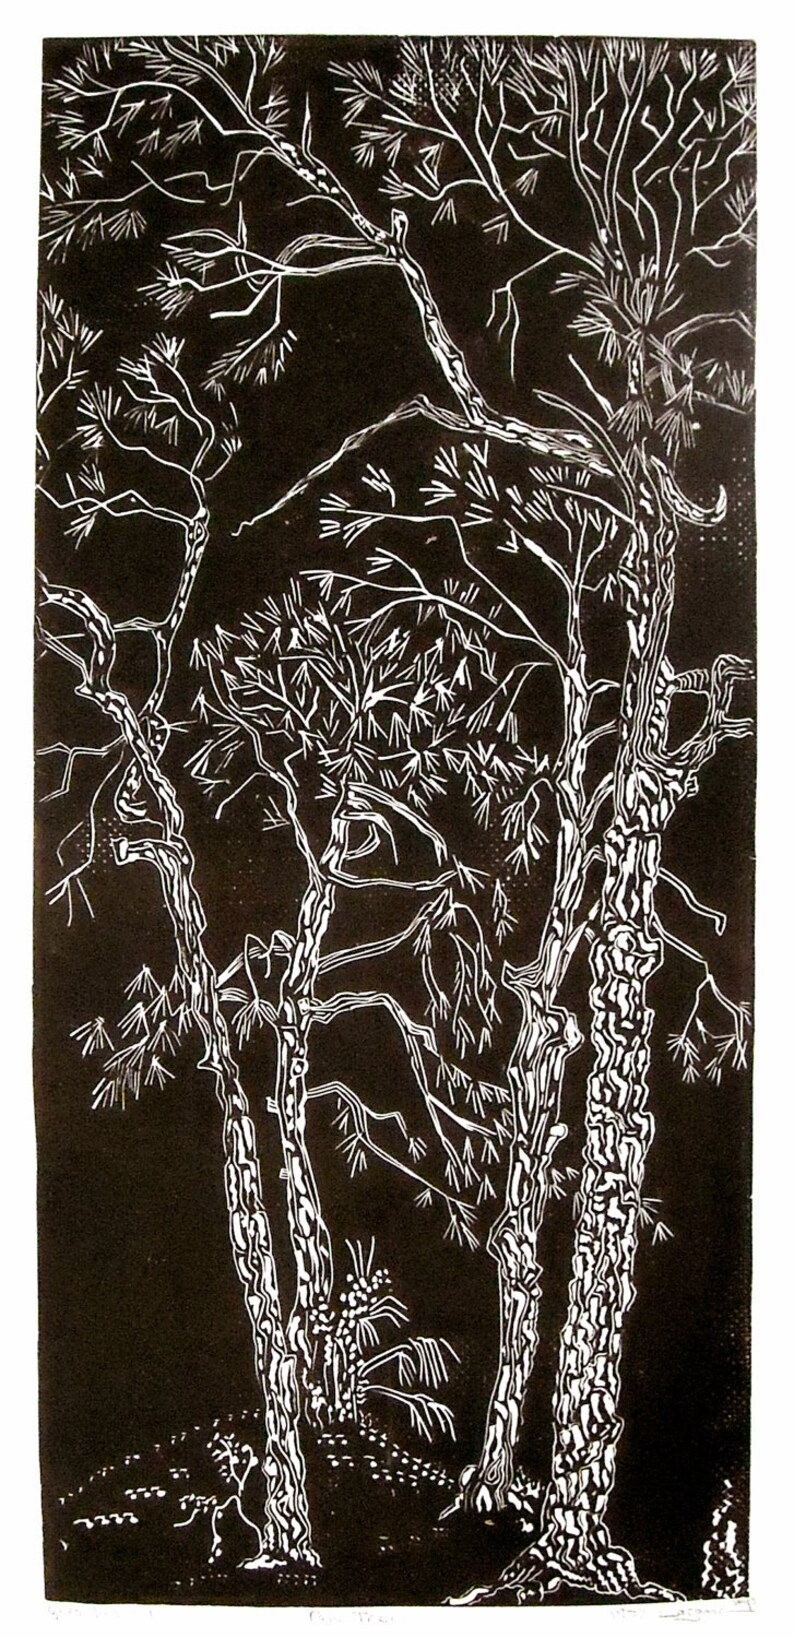 Pines, limited edition, hand printed, hand signed in pencil by the artist, linocut image 2